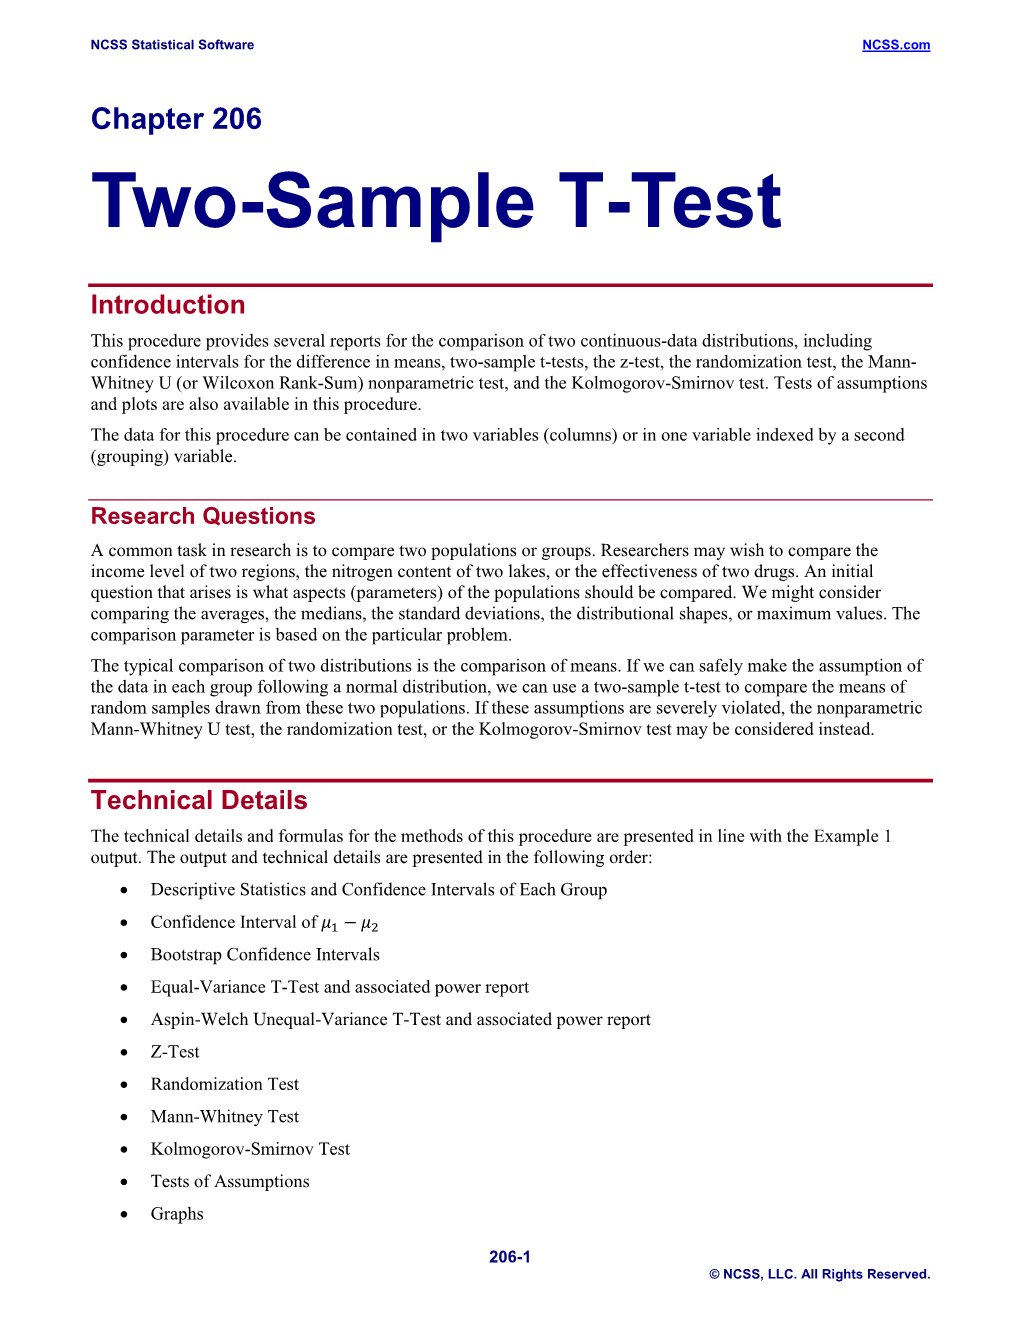 Two-Sample T-Test